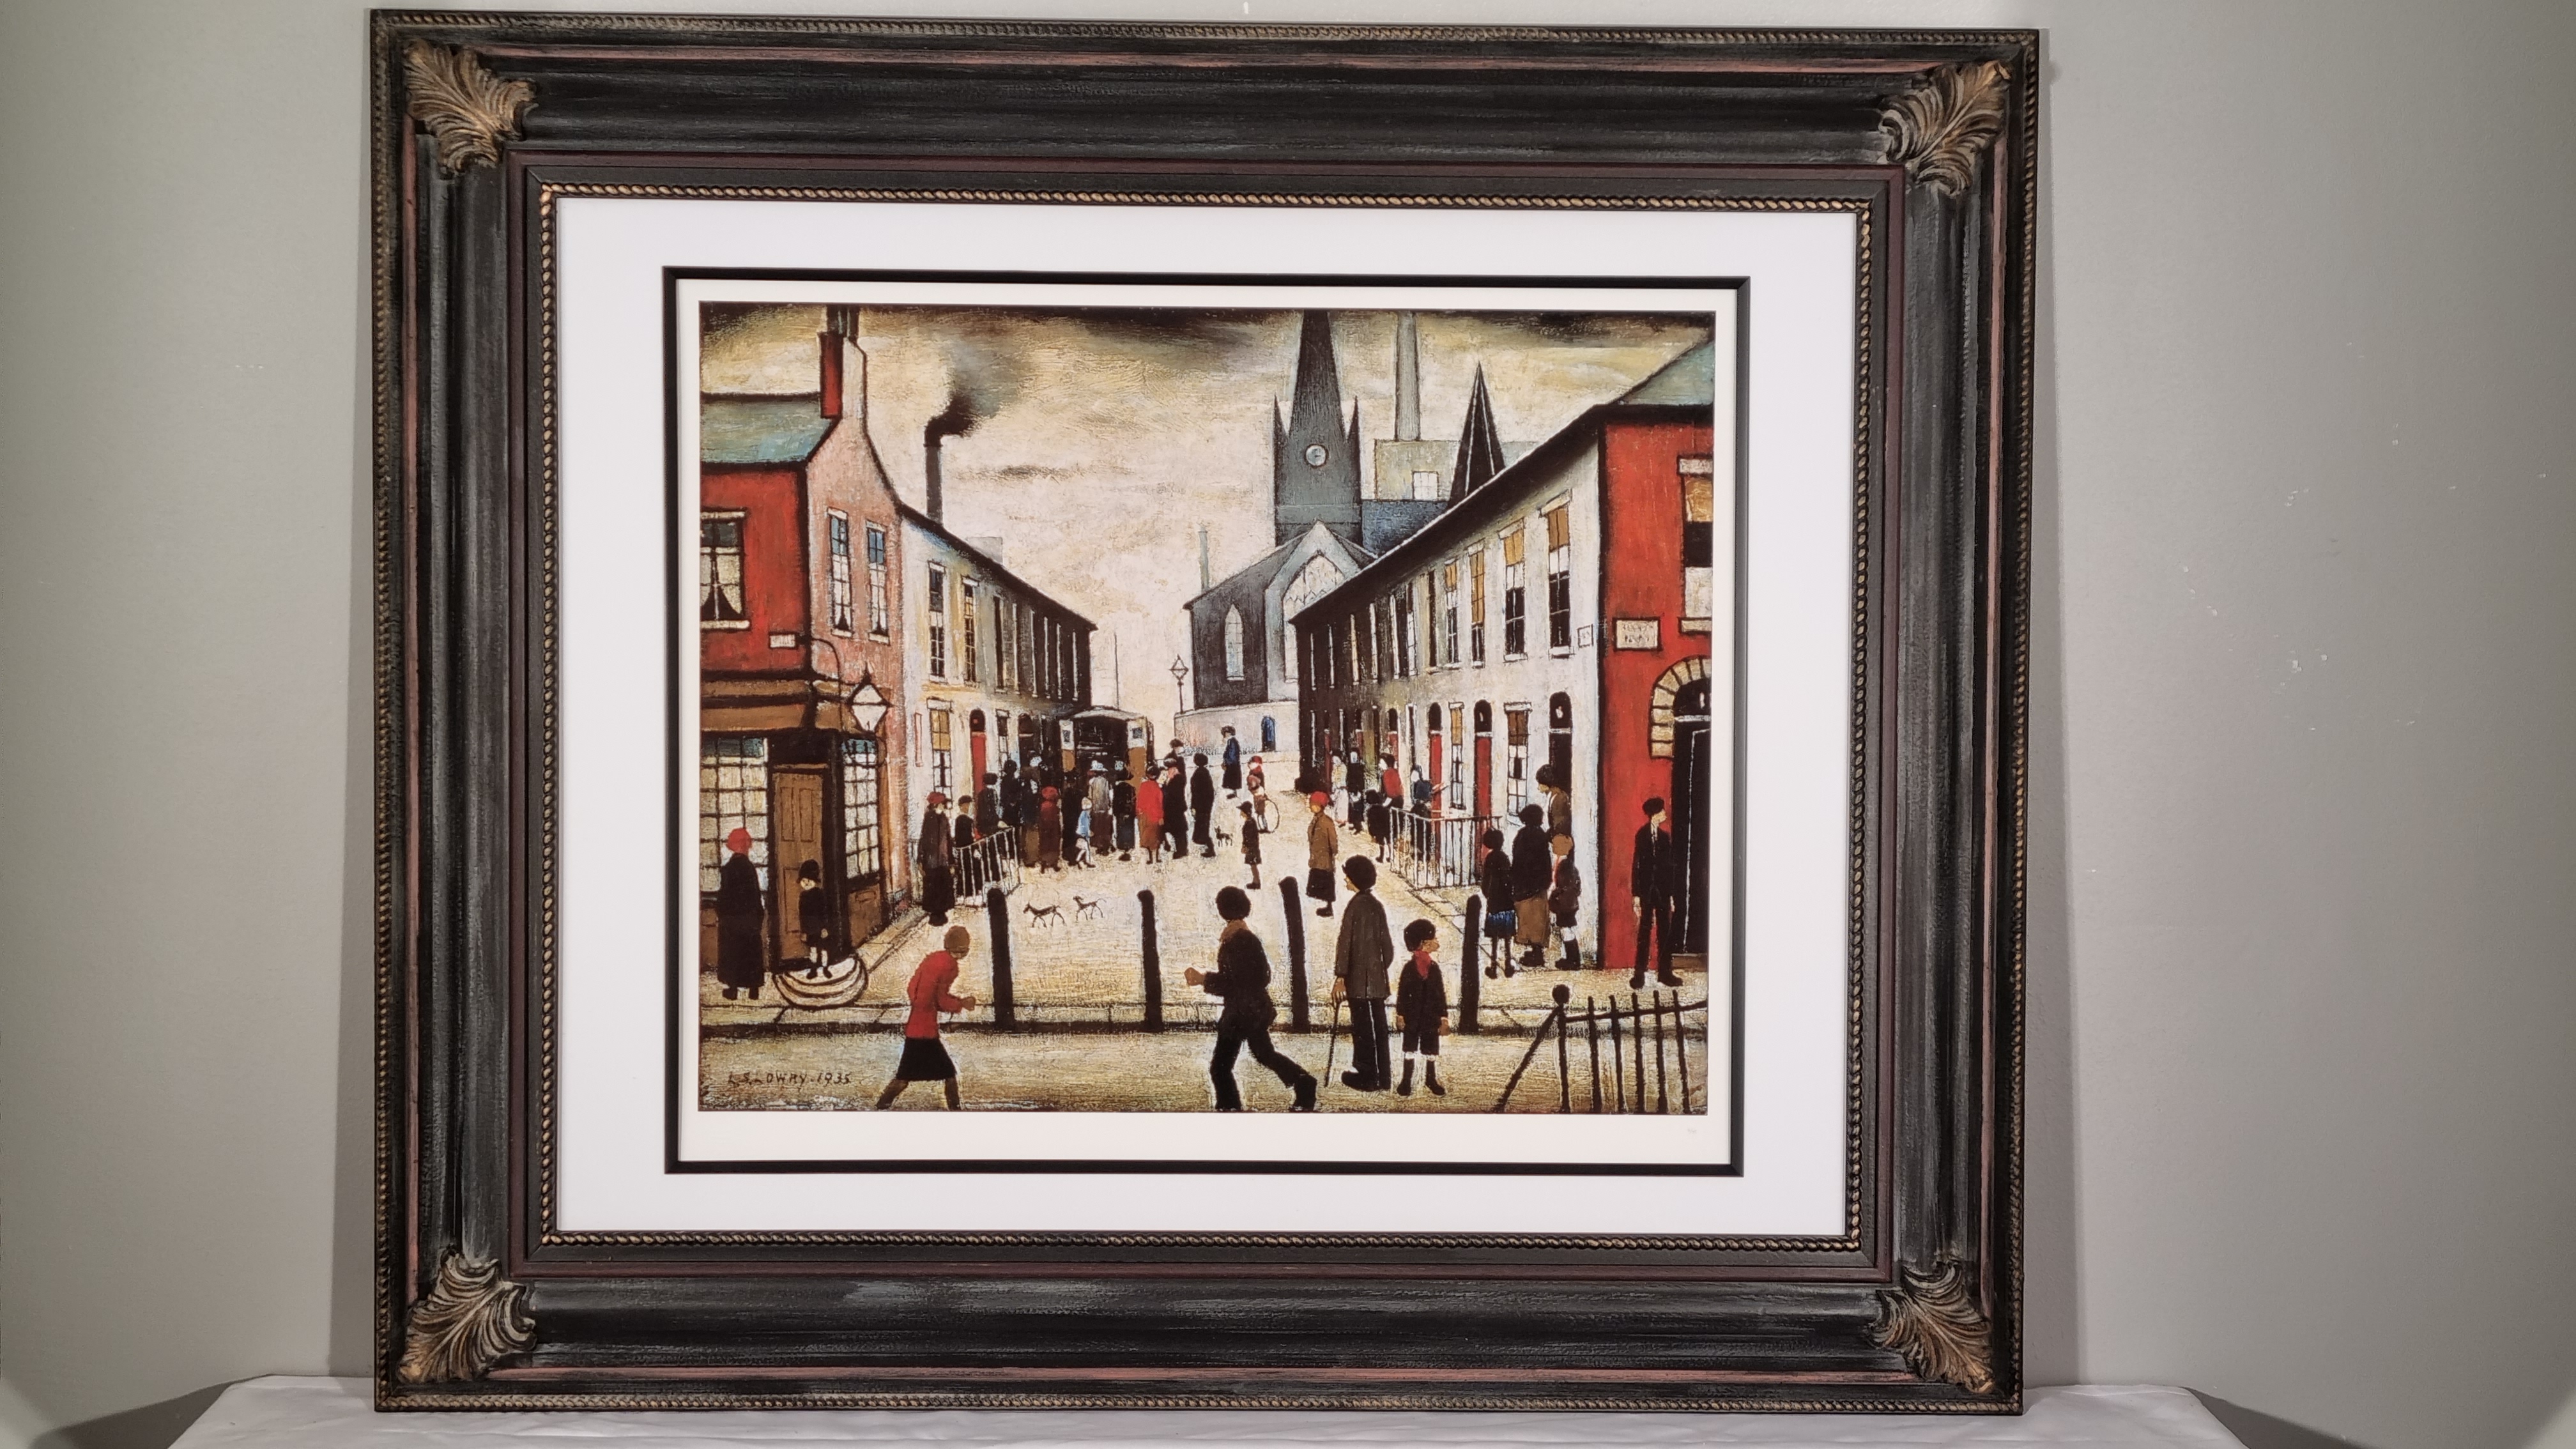 The Fever Van" Limited Edition by L.S. Lowry.